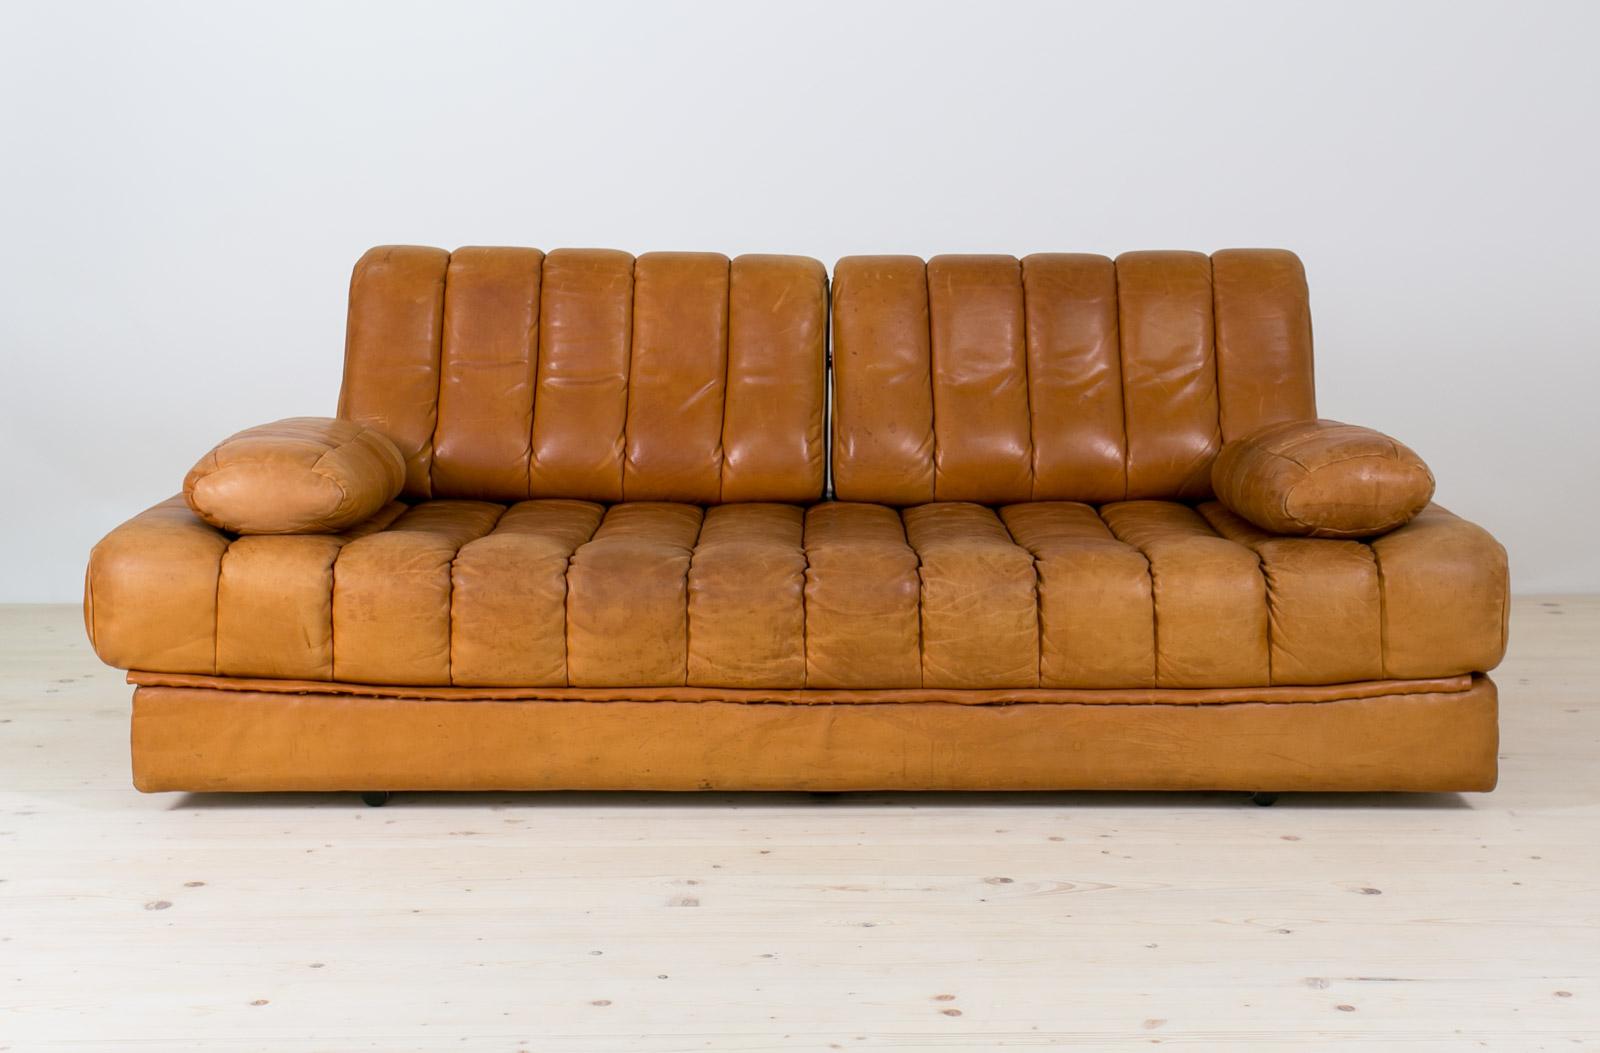 Vintage Swiss De Sede Sofa Bed from the 1960s, model DS 85 5